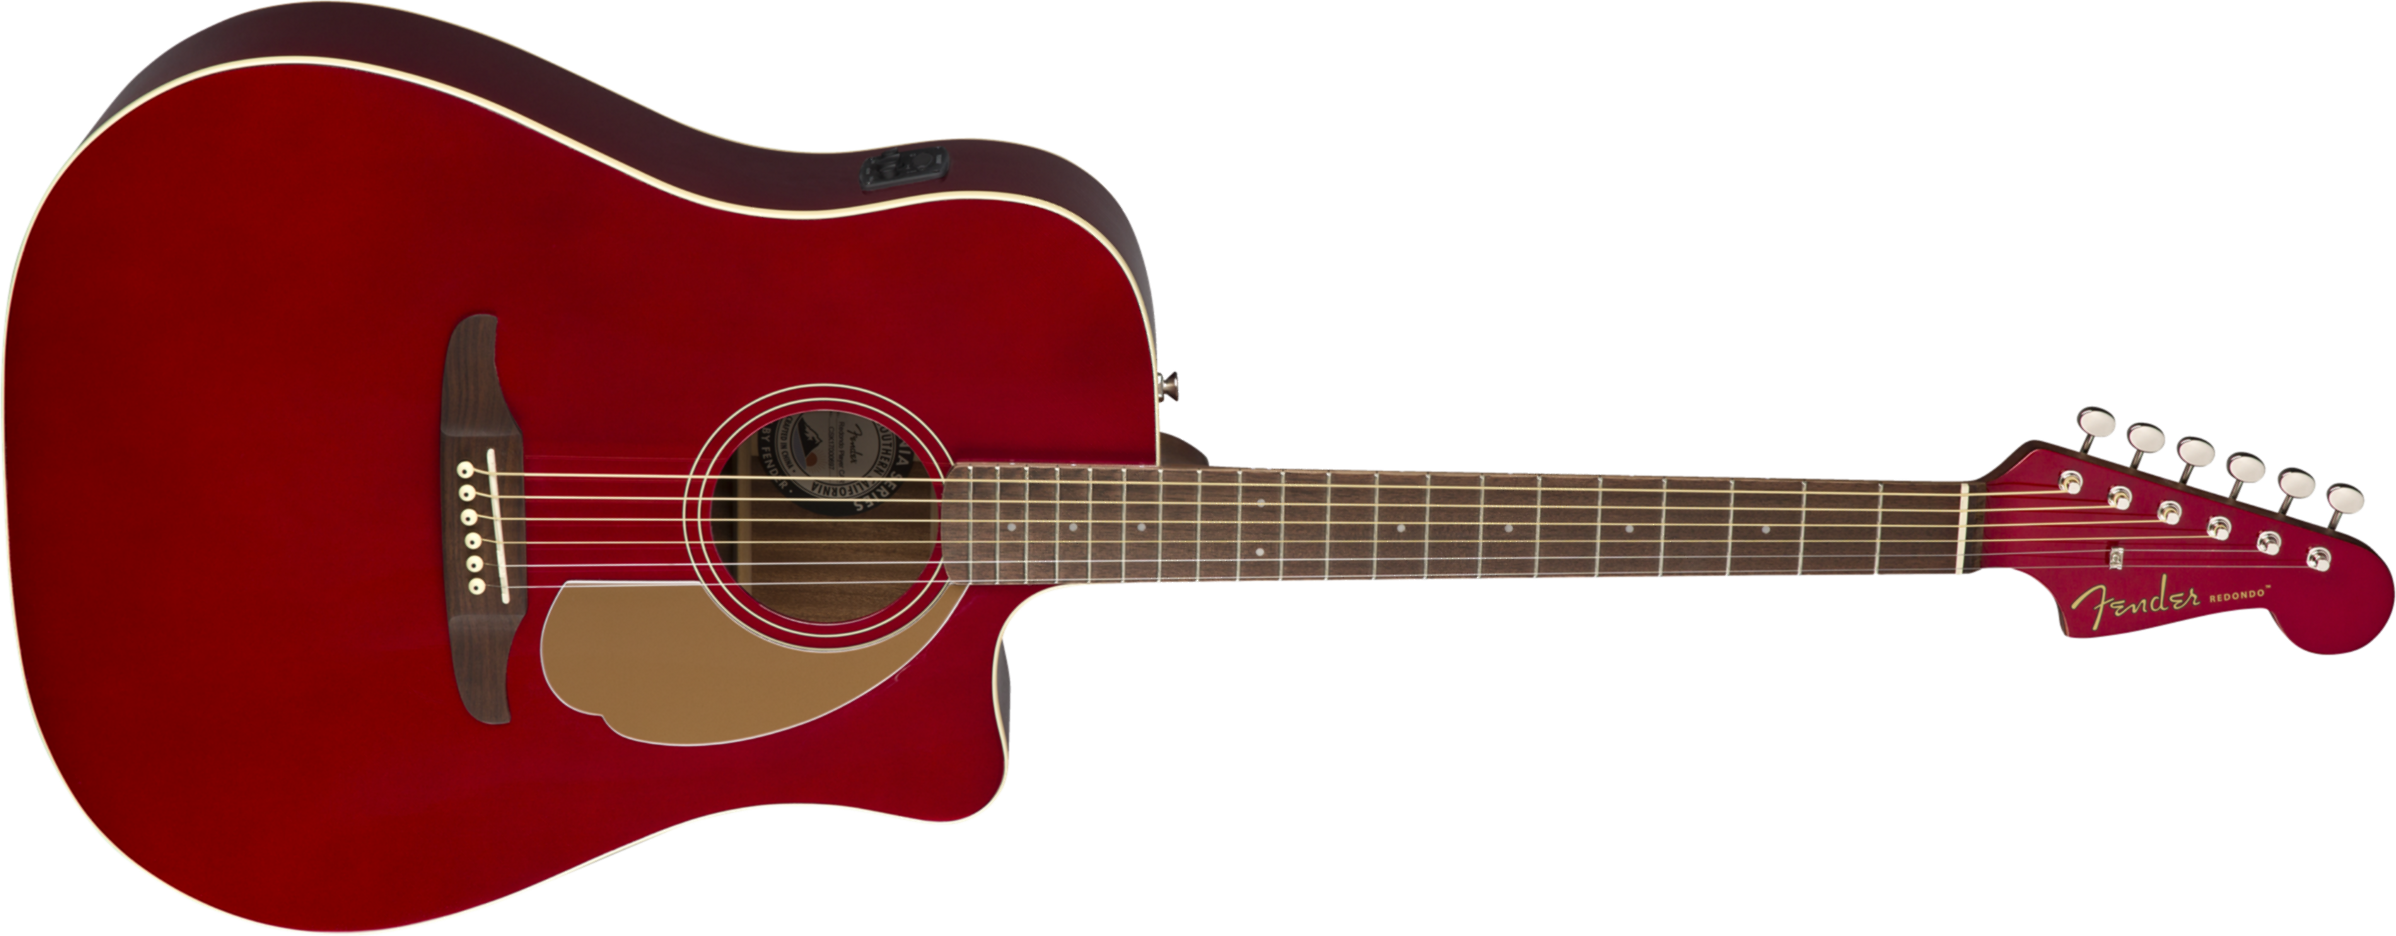 Fender Redondo Player - Candy Apple Red - Guitare Acoustique - Main picture